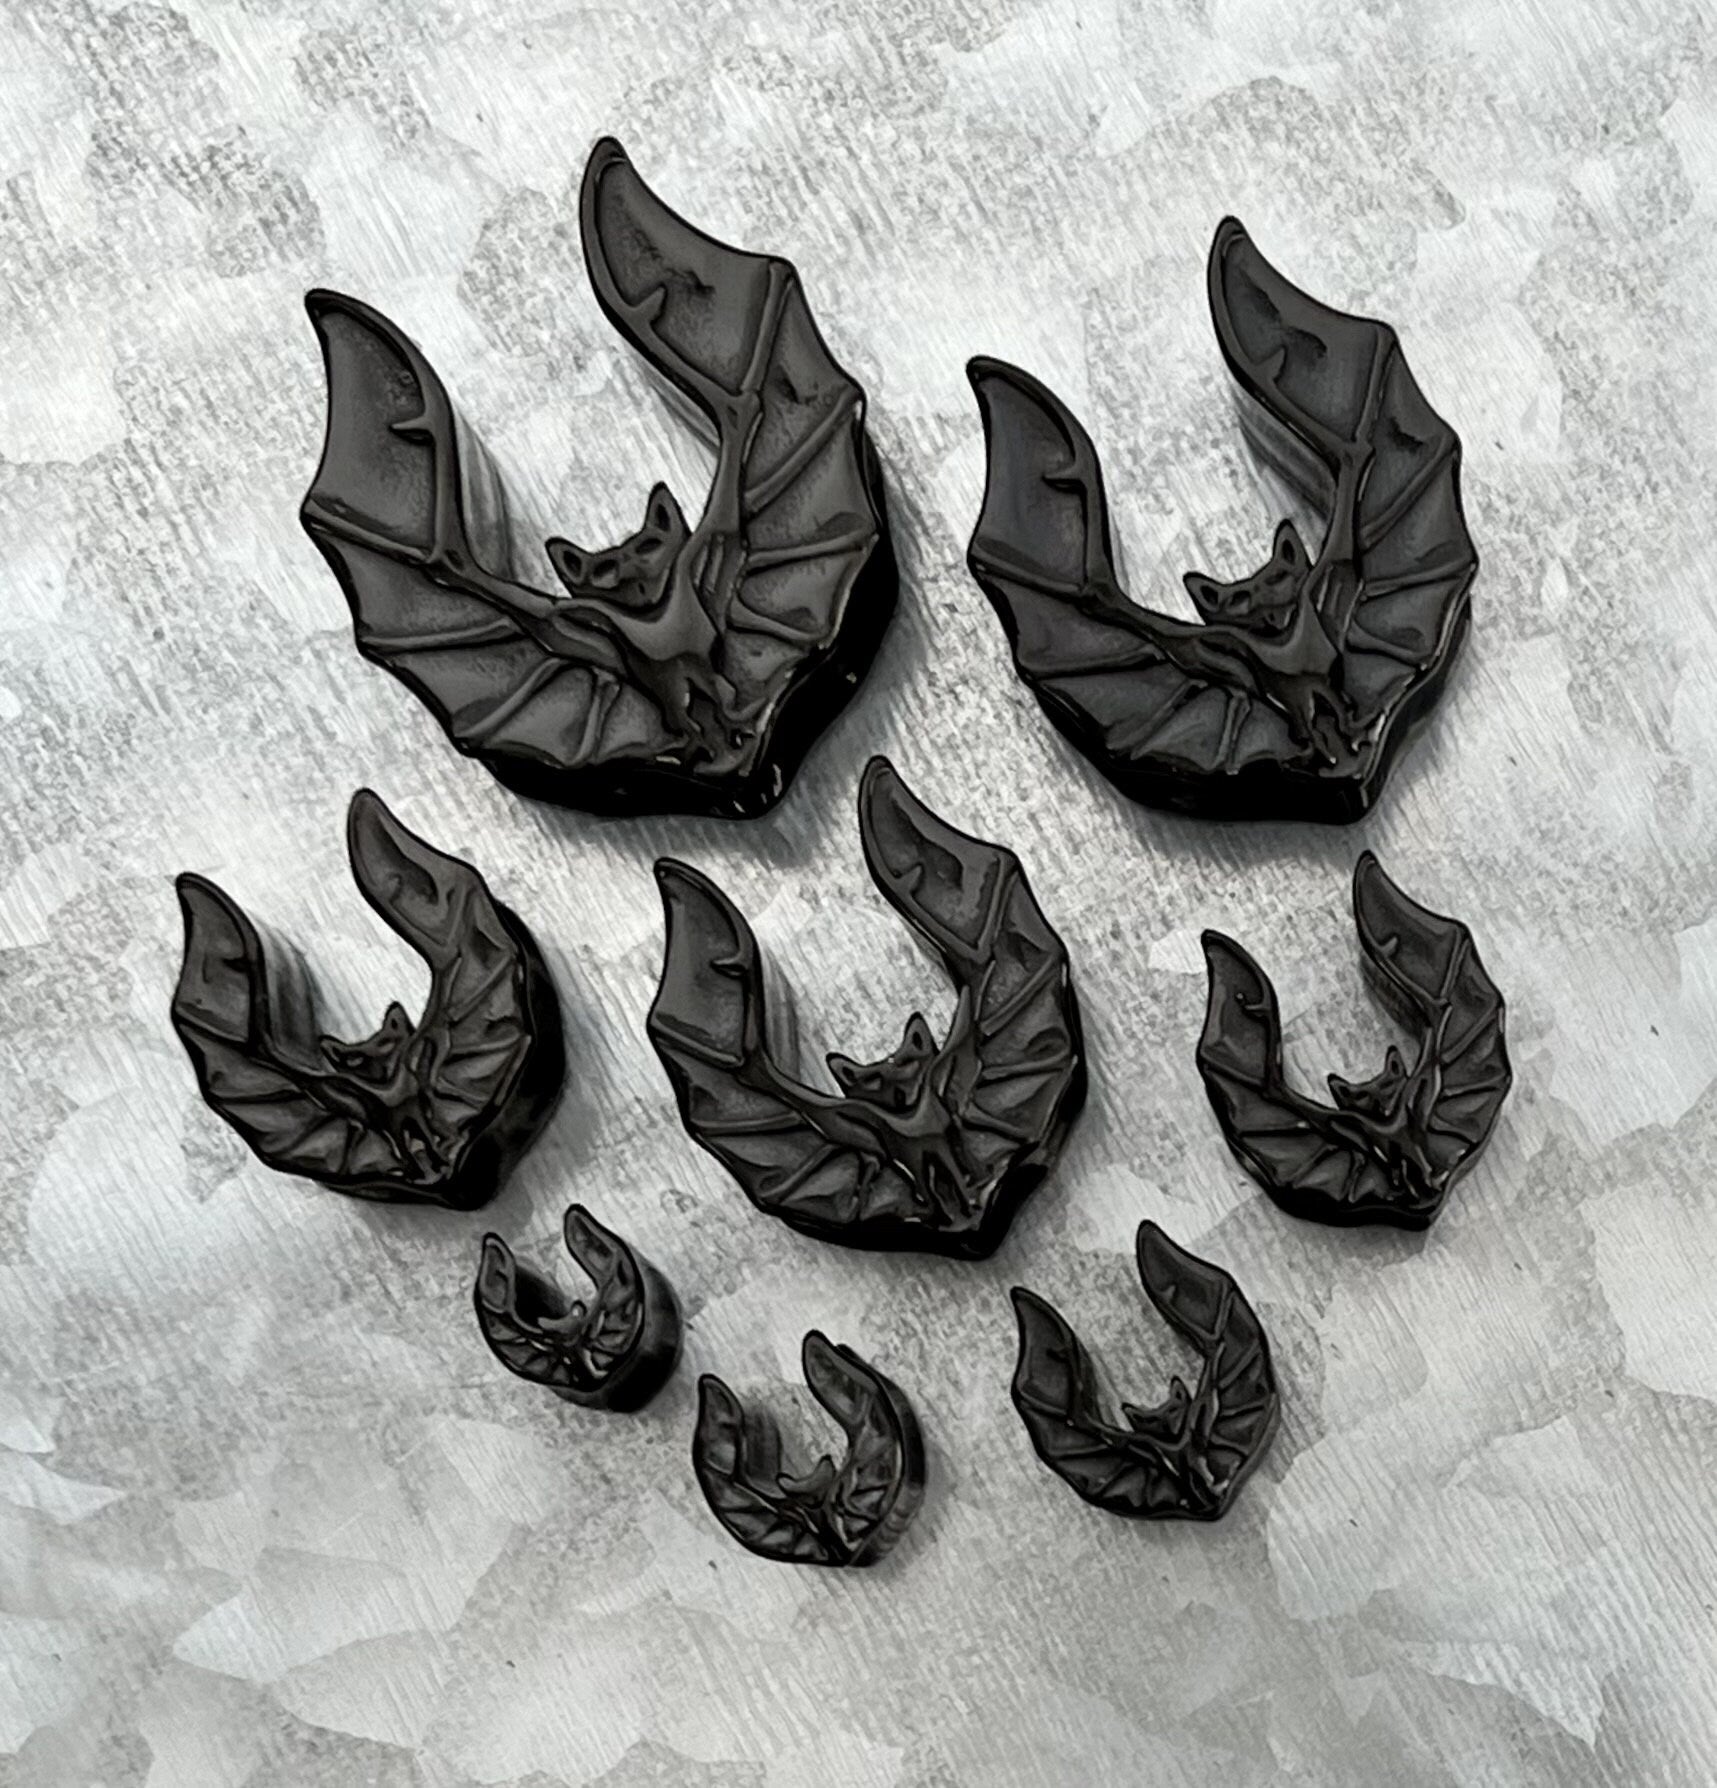 PAIR of Unique Black Bat Saddle Gothic Ear Spreader Surgical Steel Tunnels/Plugs - Gauges 0g (8mm) through 1" (25mm) available!